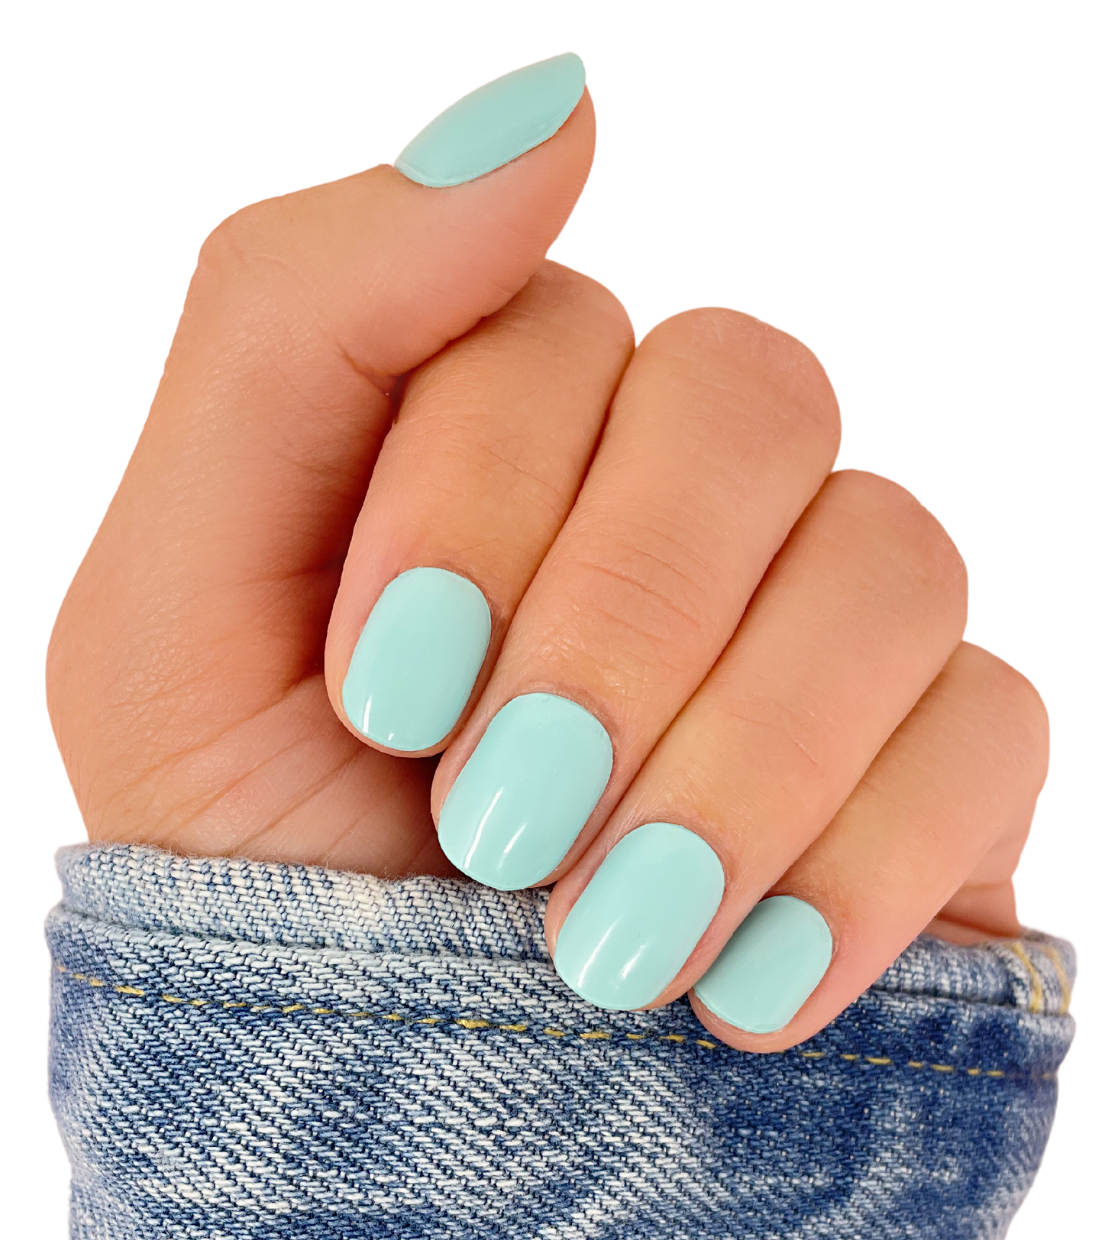 Turquoise and Caicos - Semi-Cured Gel Nail Wraps | Polish Pops